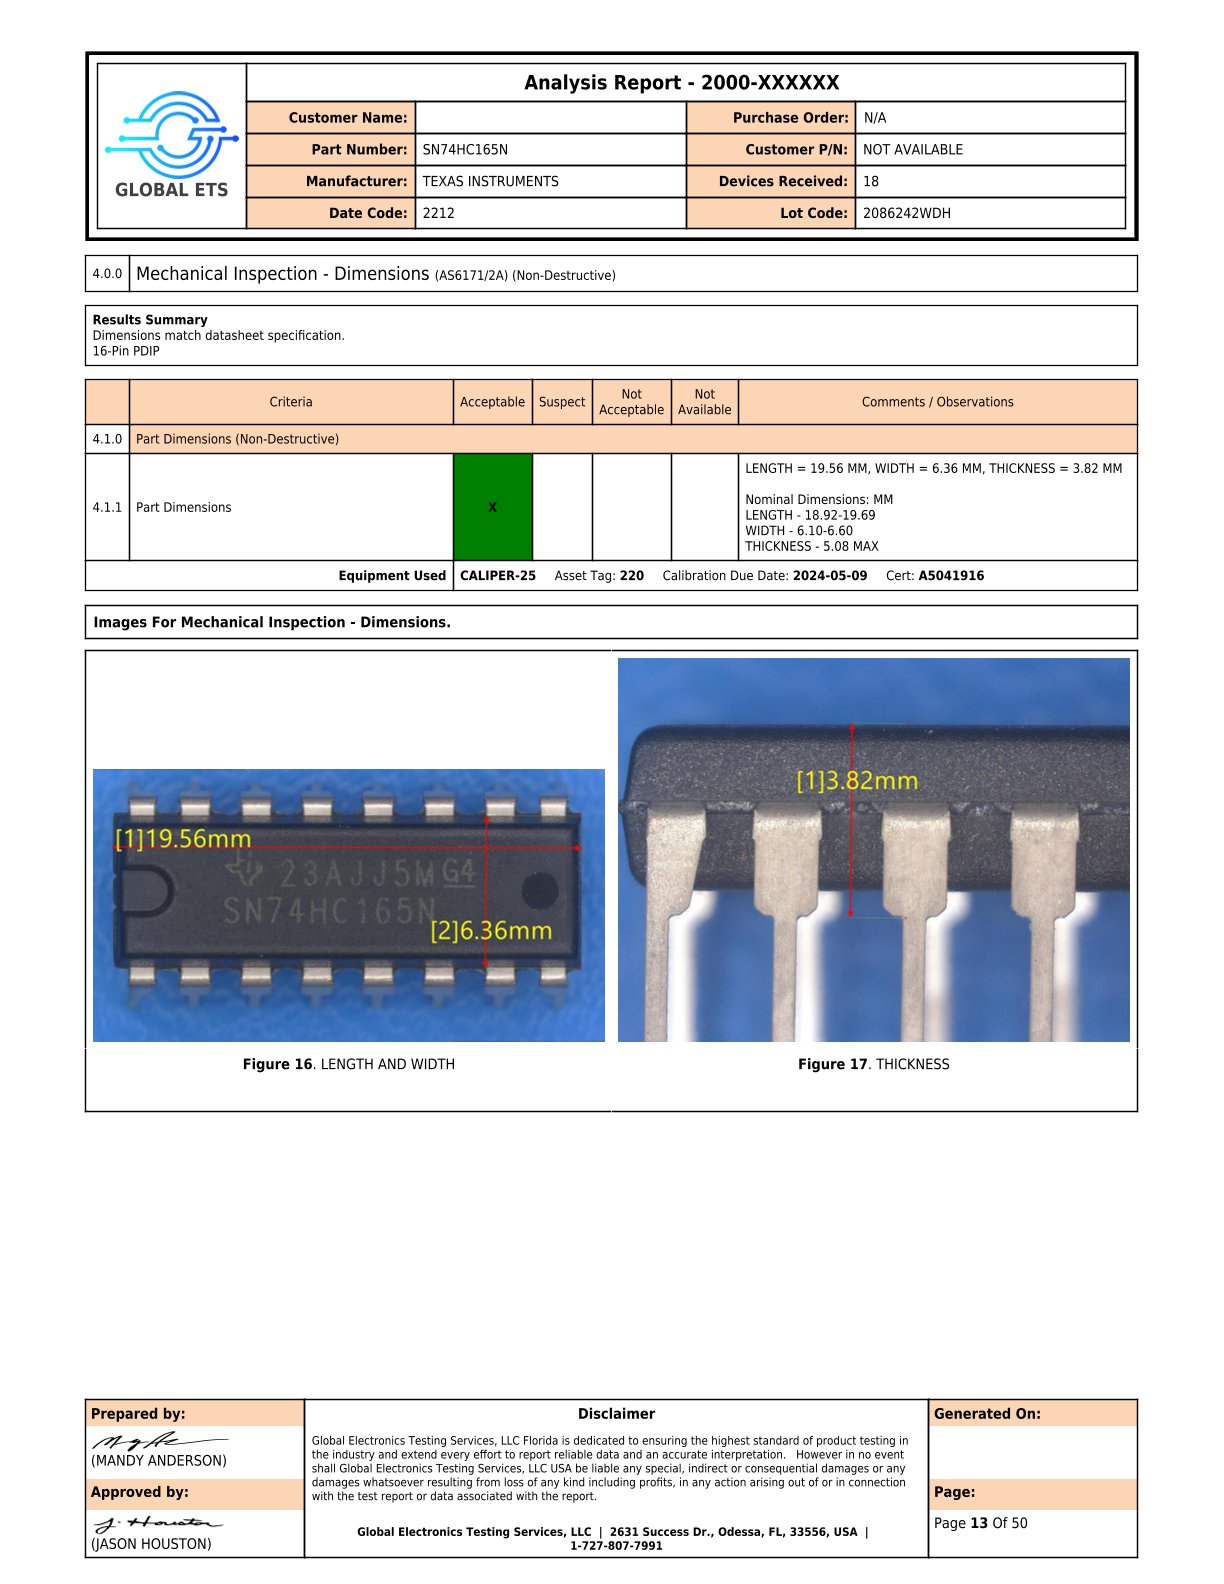 Analysis report document from Global Electronics Testing Services, showcasing mechanical inspection results for a part manufactured by Texas Instruments. The report includes a table with criteria for part dimensions, images with measurements of length, width, and thickness, and signatures for preparation and approval.